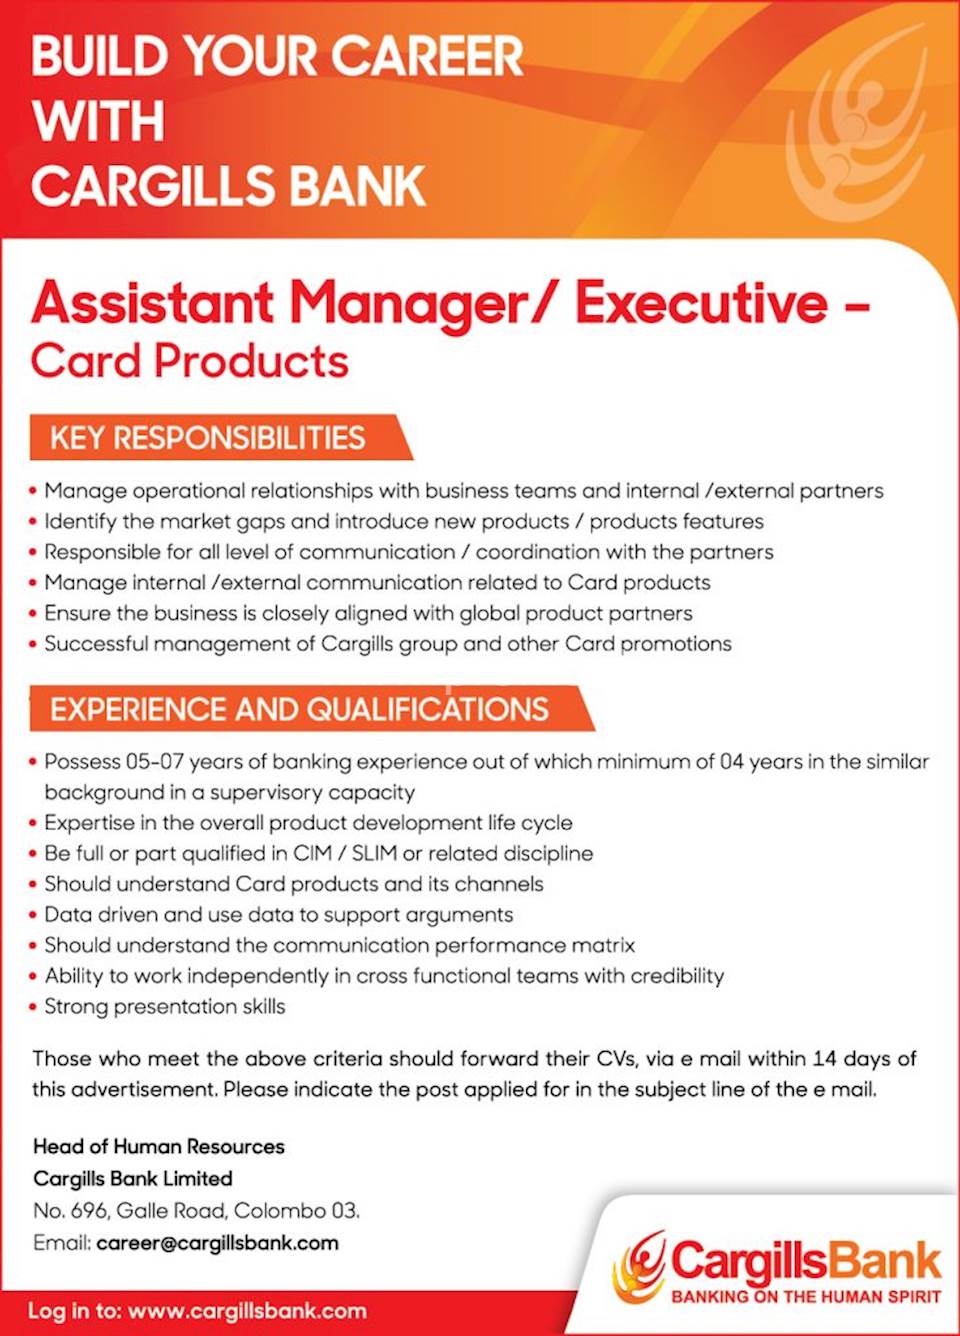 Assistant Manager / Executive - Card Products 